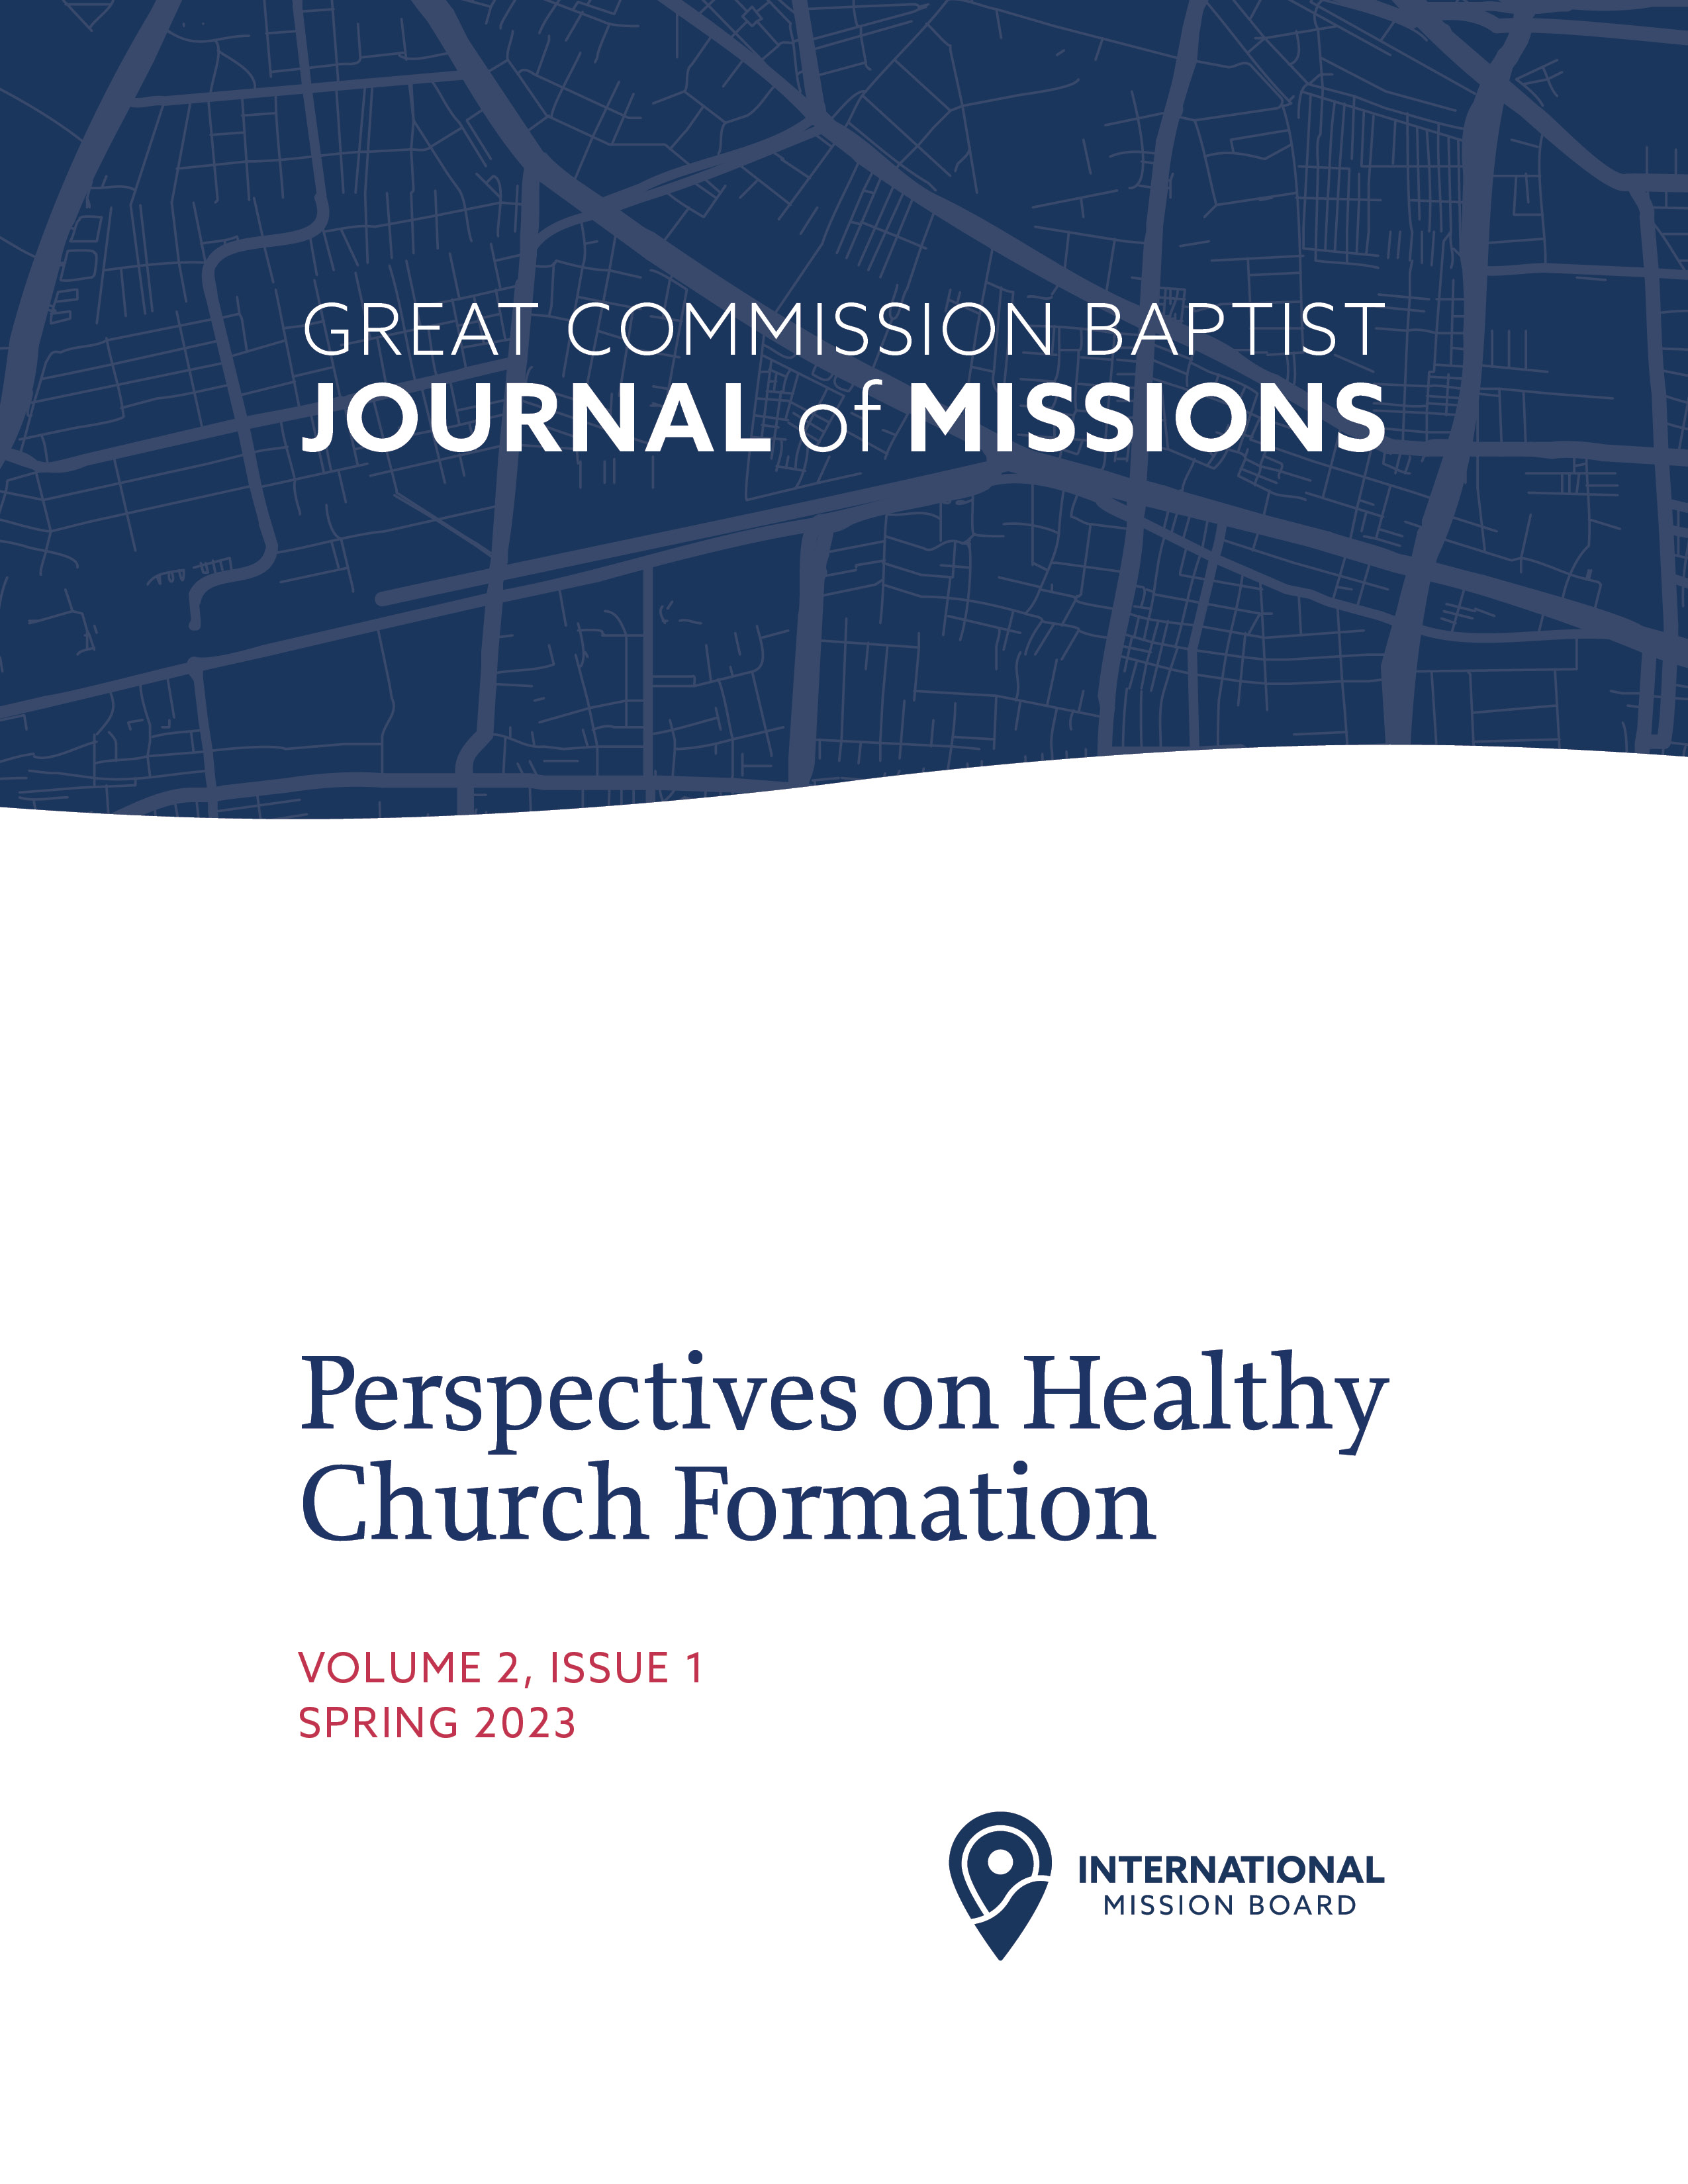 Cover image for volume 2, issue 1 (spring 2023), "Perspectives on Healthy Church Formation"